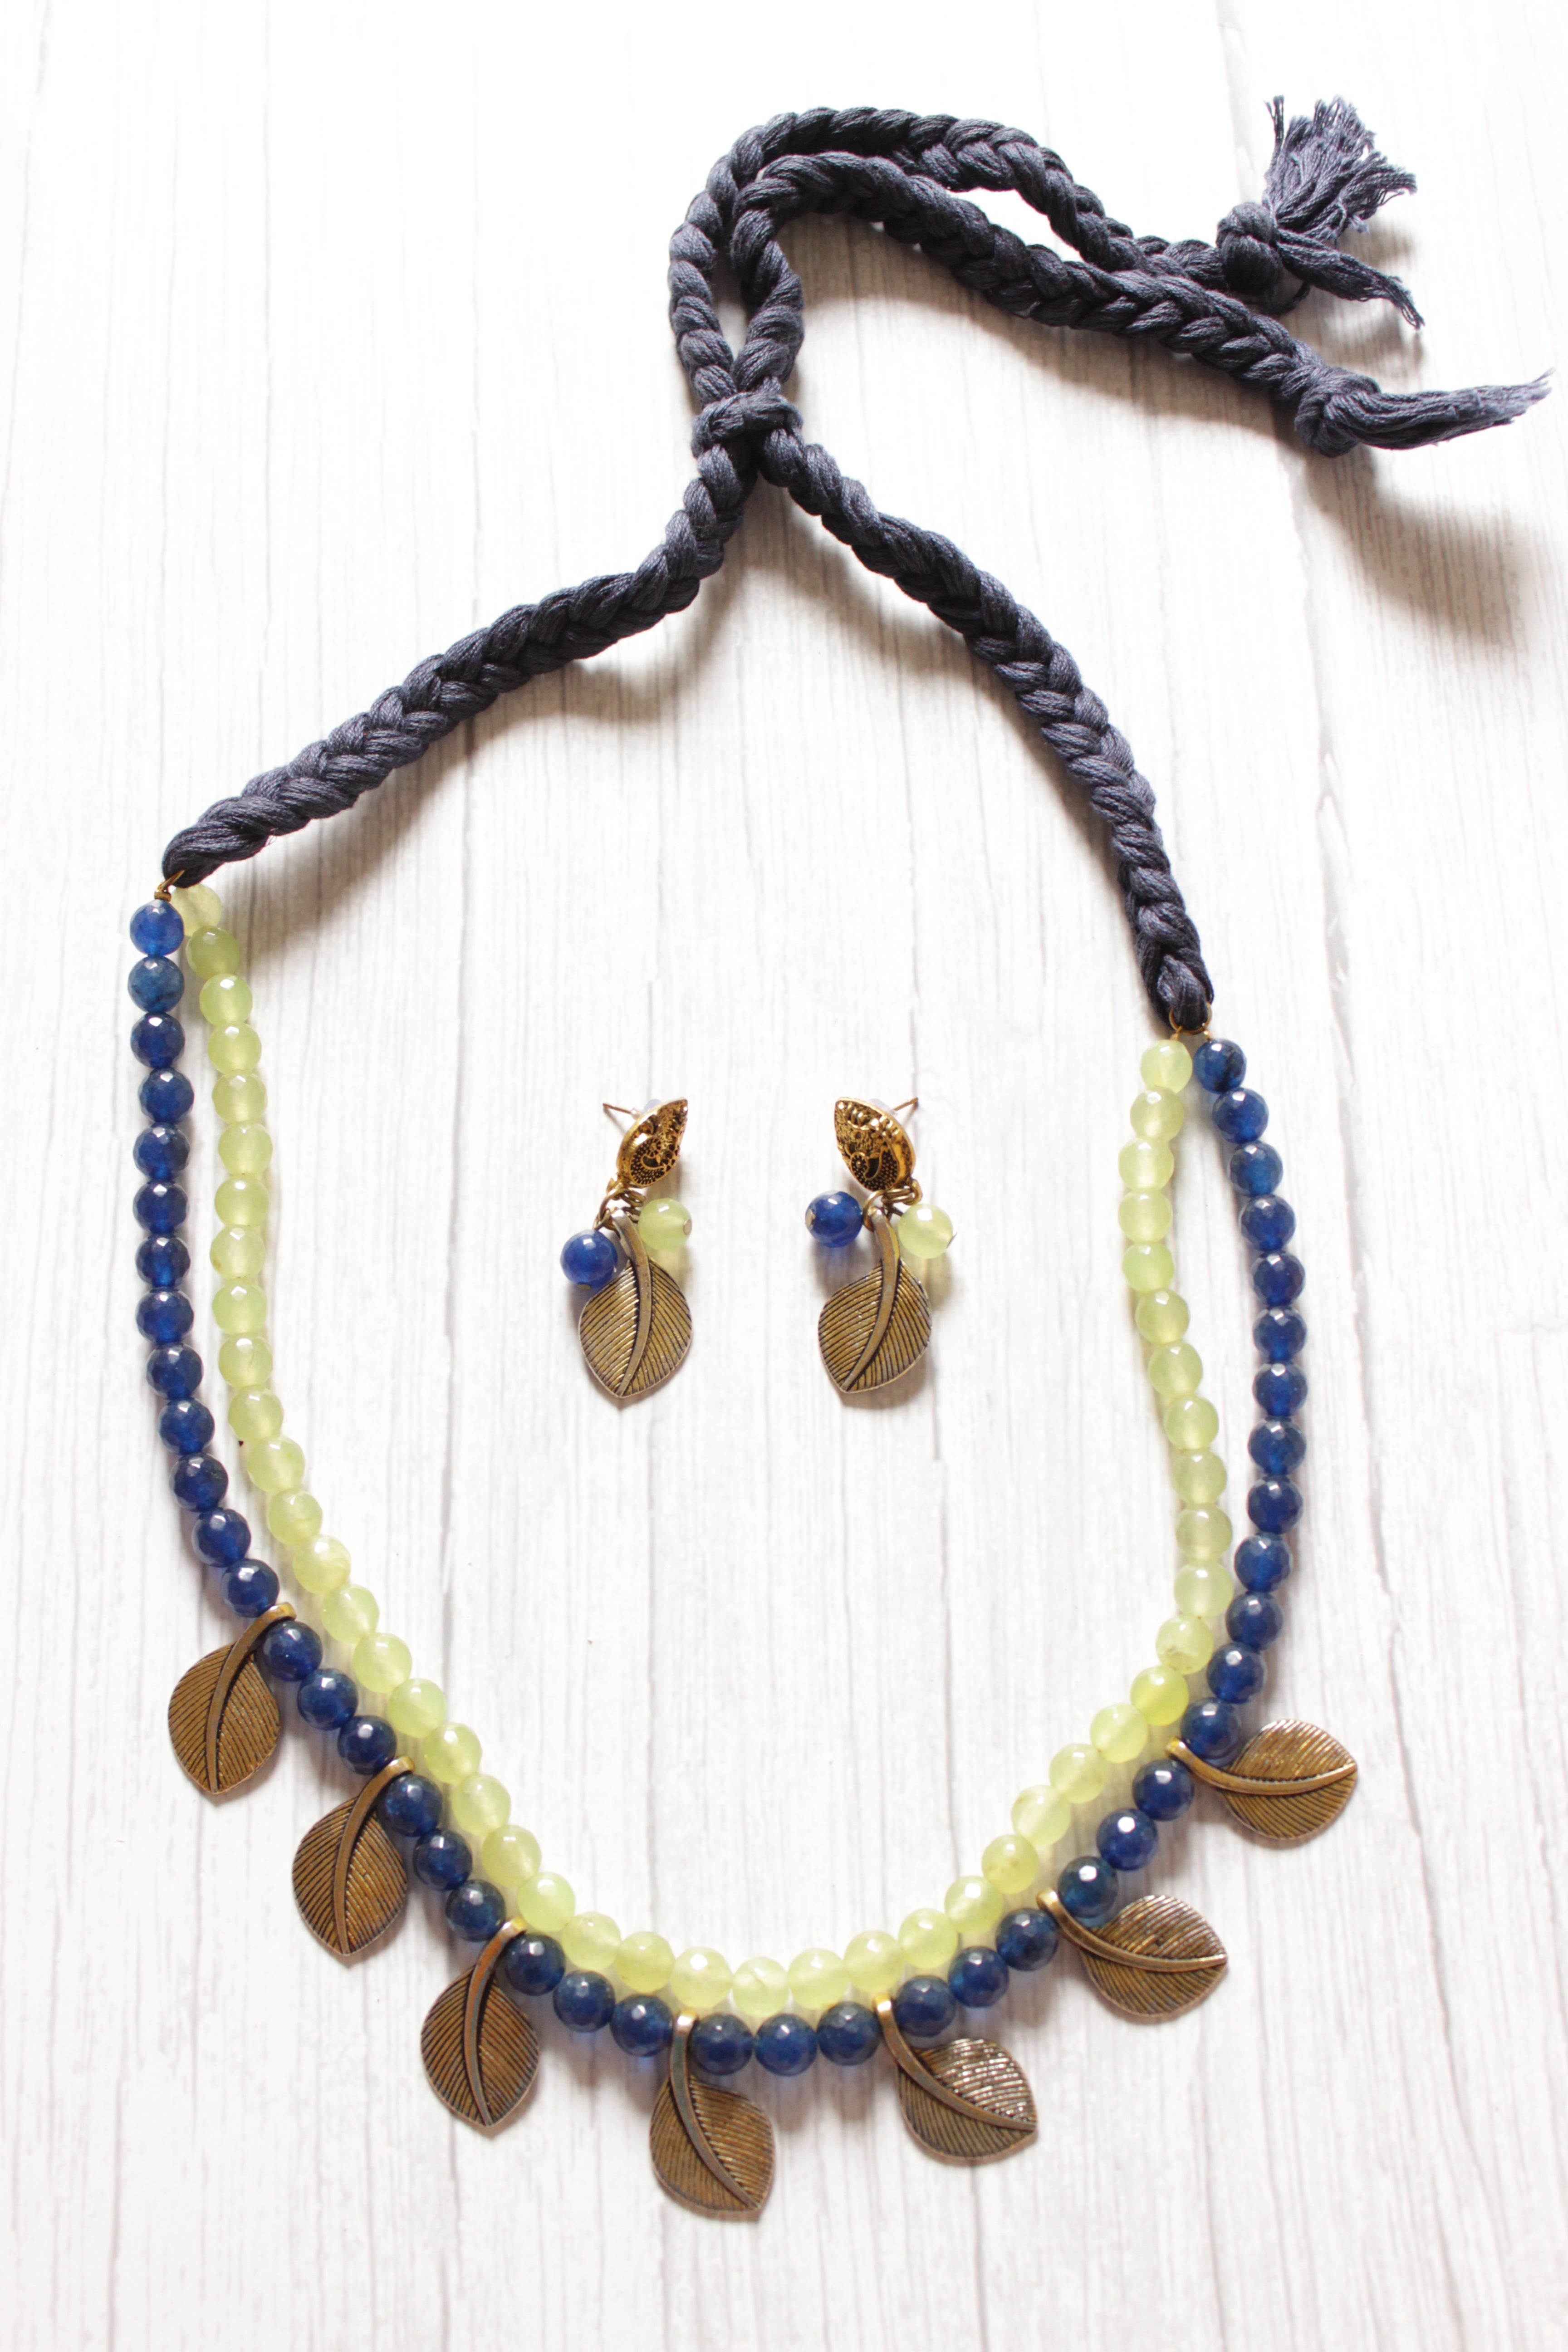 2 Layer Blue and Lemon Jade Beads Leaf Charms Necklace Set